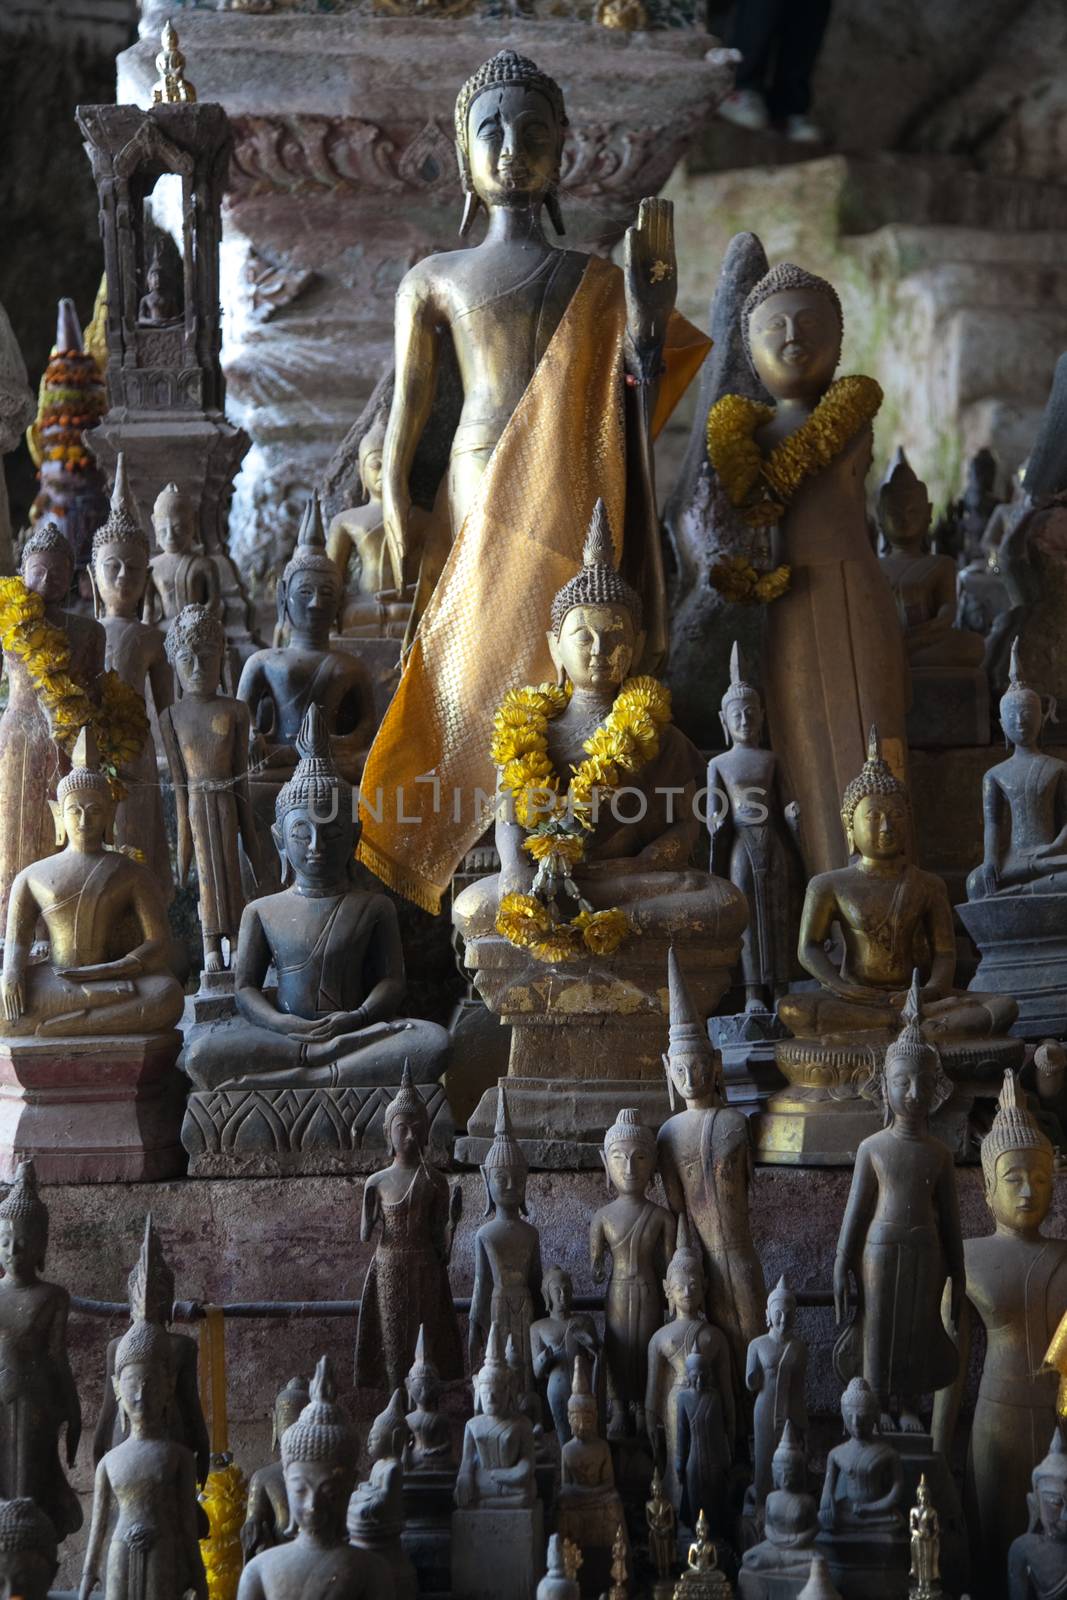 Ou Pak Caves Laos with small and miniature Buddha statues in many different pose by kgboxford